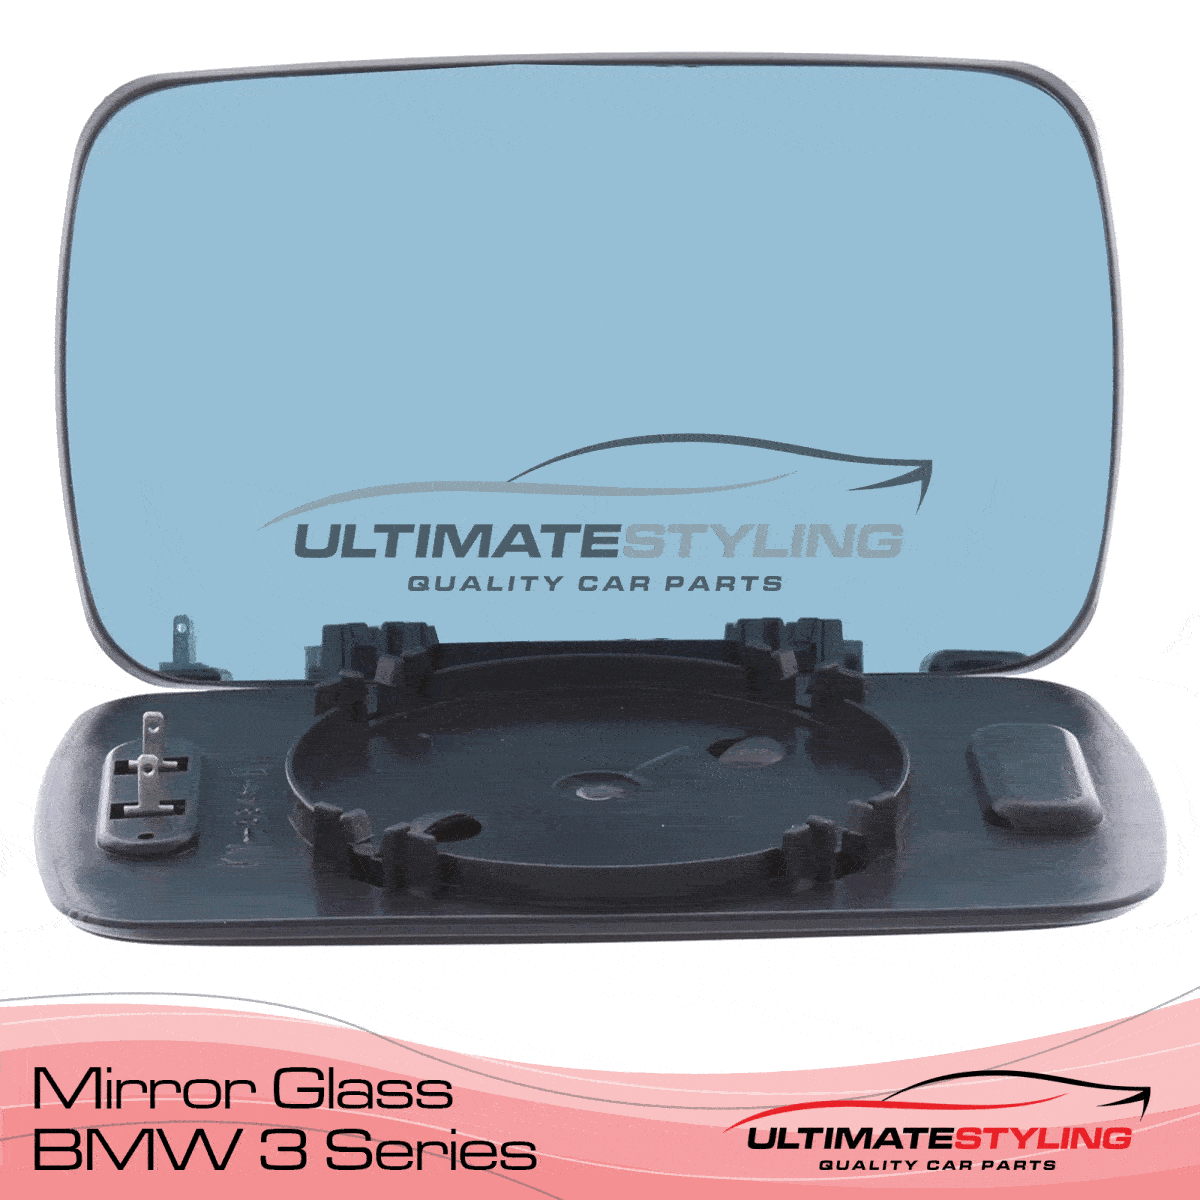 360 view of a BMW 3 Series wing mirror glass replacement